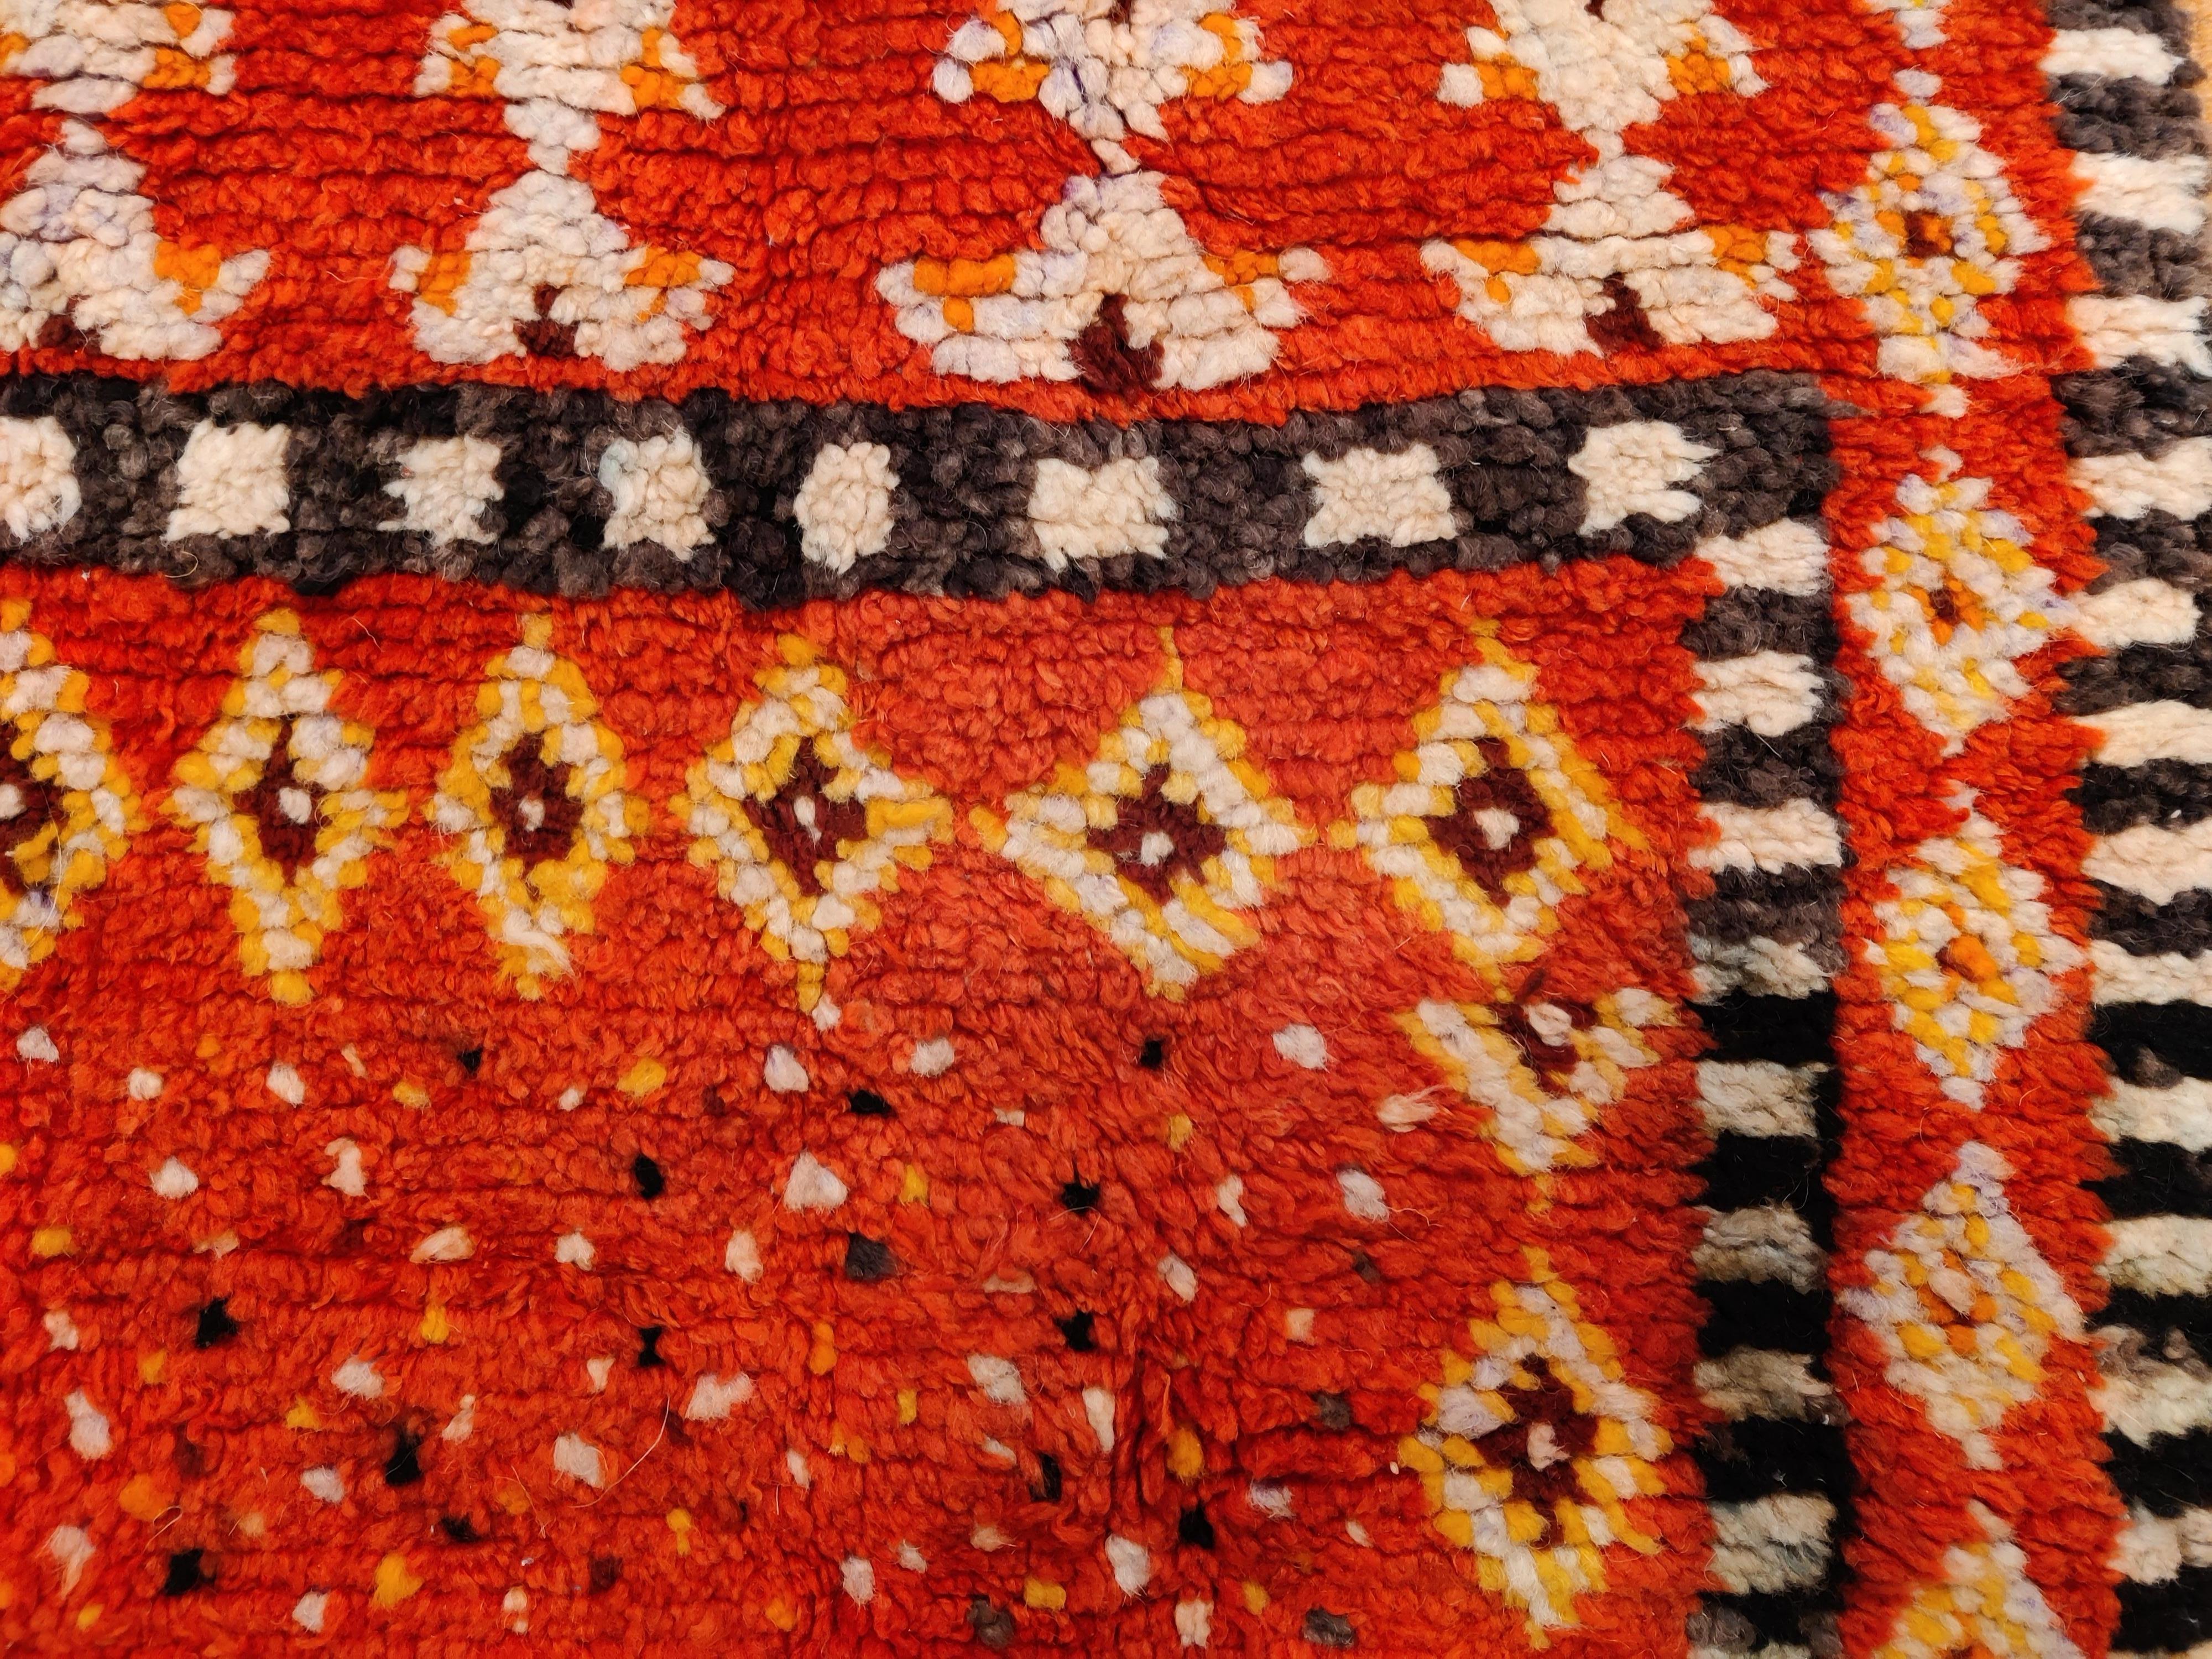 A very finely woven saddle rug from the Ait Ouaouzguite Berber tribe, located in the Jebel Siroua area in southern Morocco, distinguished by an abstract chequerboard and pointillist-type pattern on a rich red background. These rare items were woven